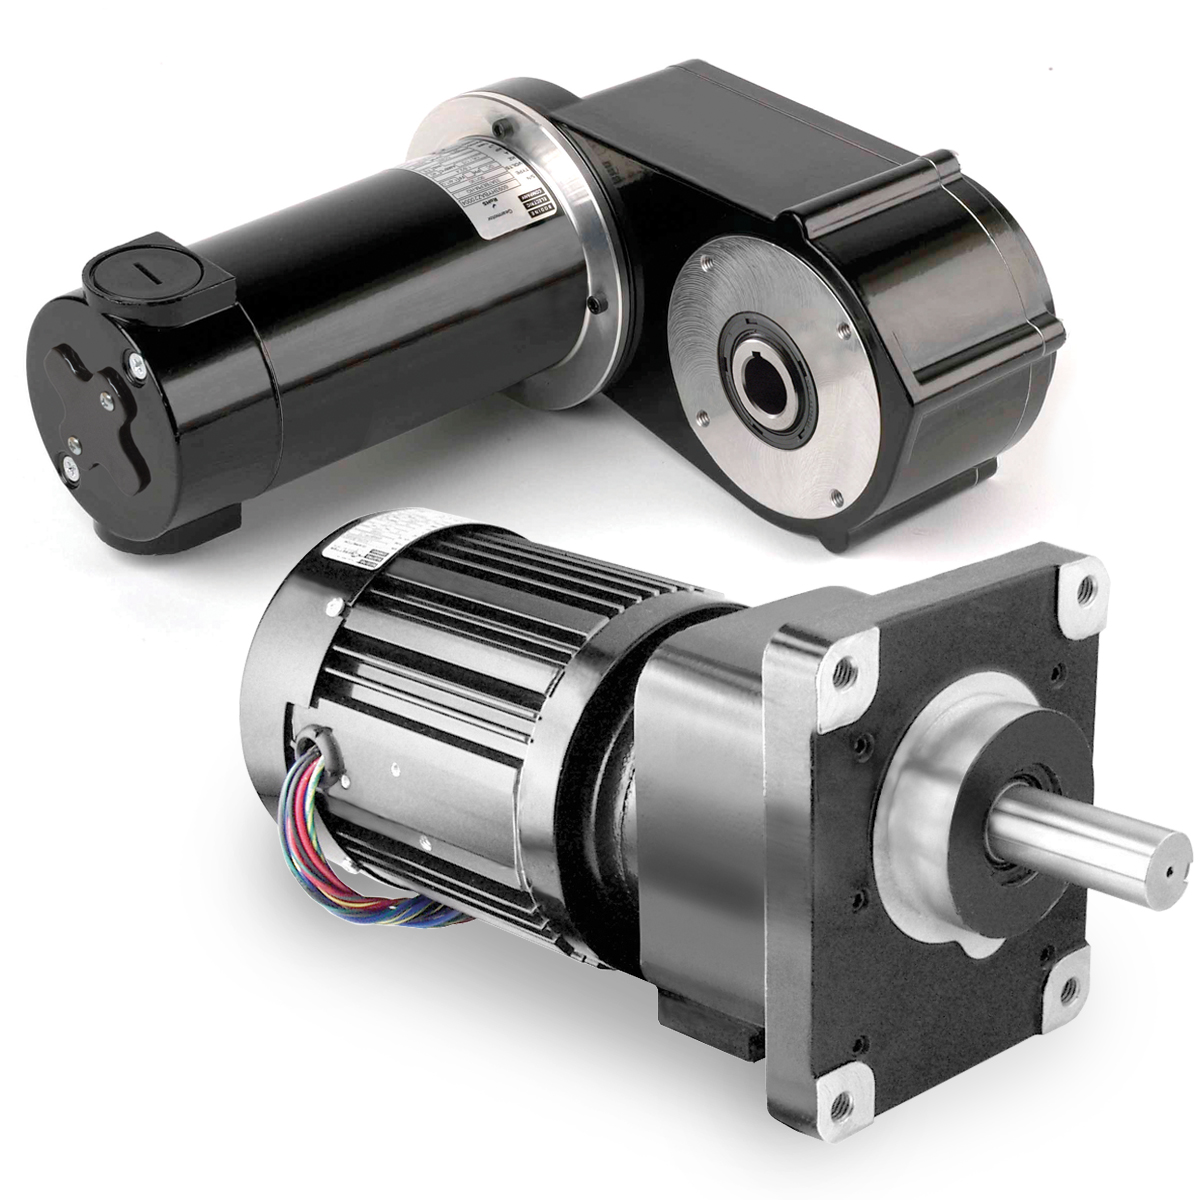 https://www.bodine-electric.com/core/files/bodineelectric/uploads/images/bodine-gearmotors-33a-hg-h-and-48r-cg.jpg